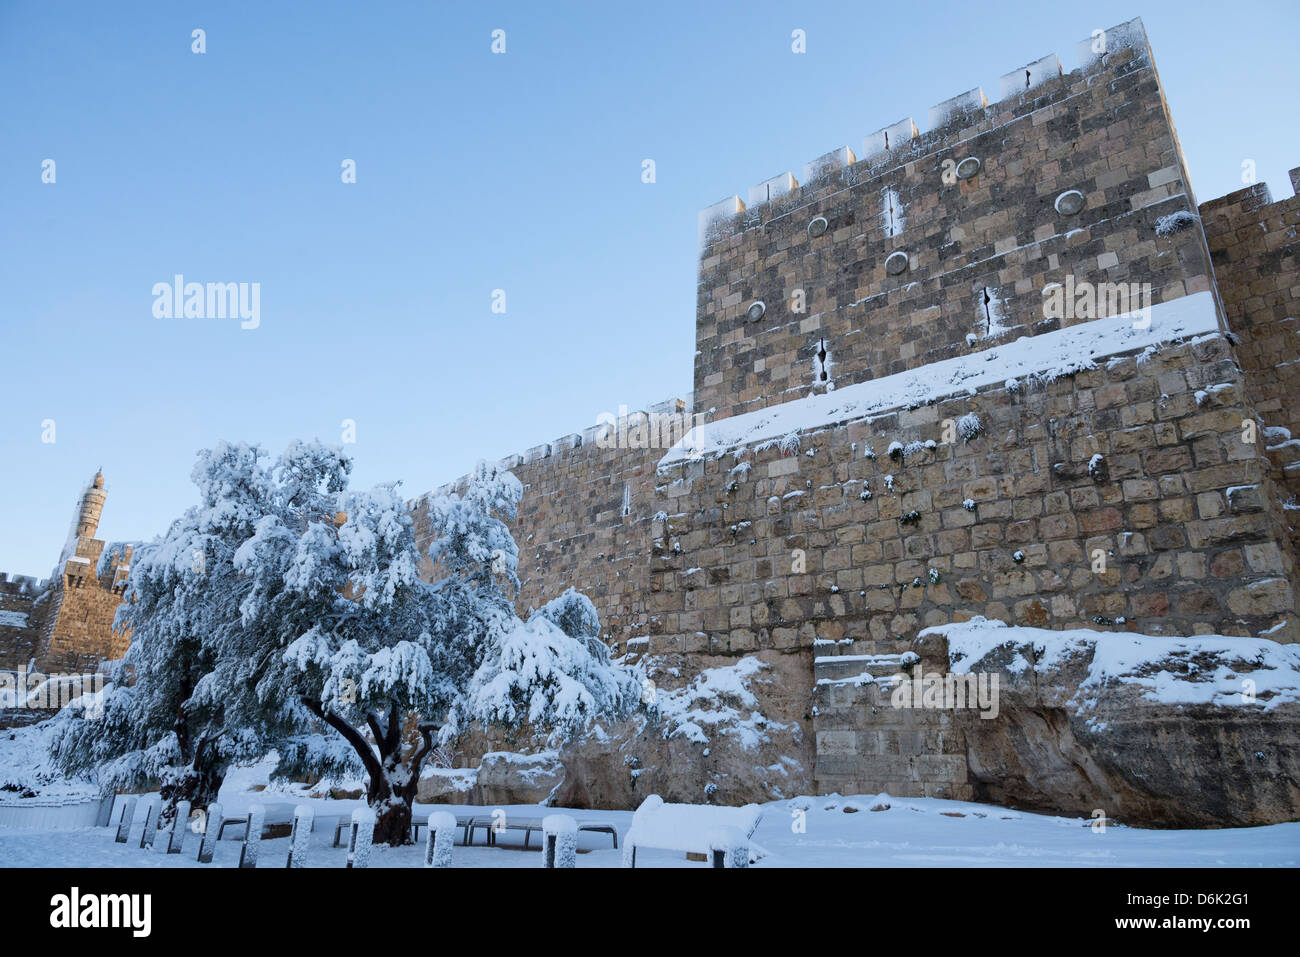 Snow in Jerusalem on January 10, 2013. Old City walls and Tower of David. Stock Photo